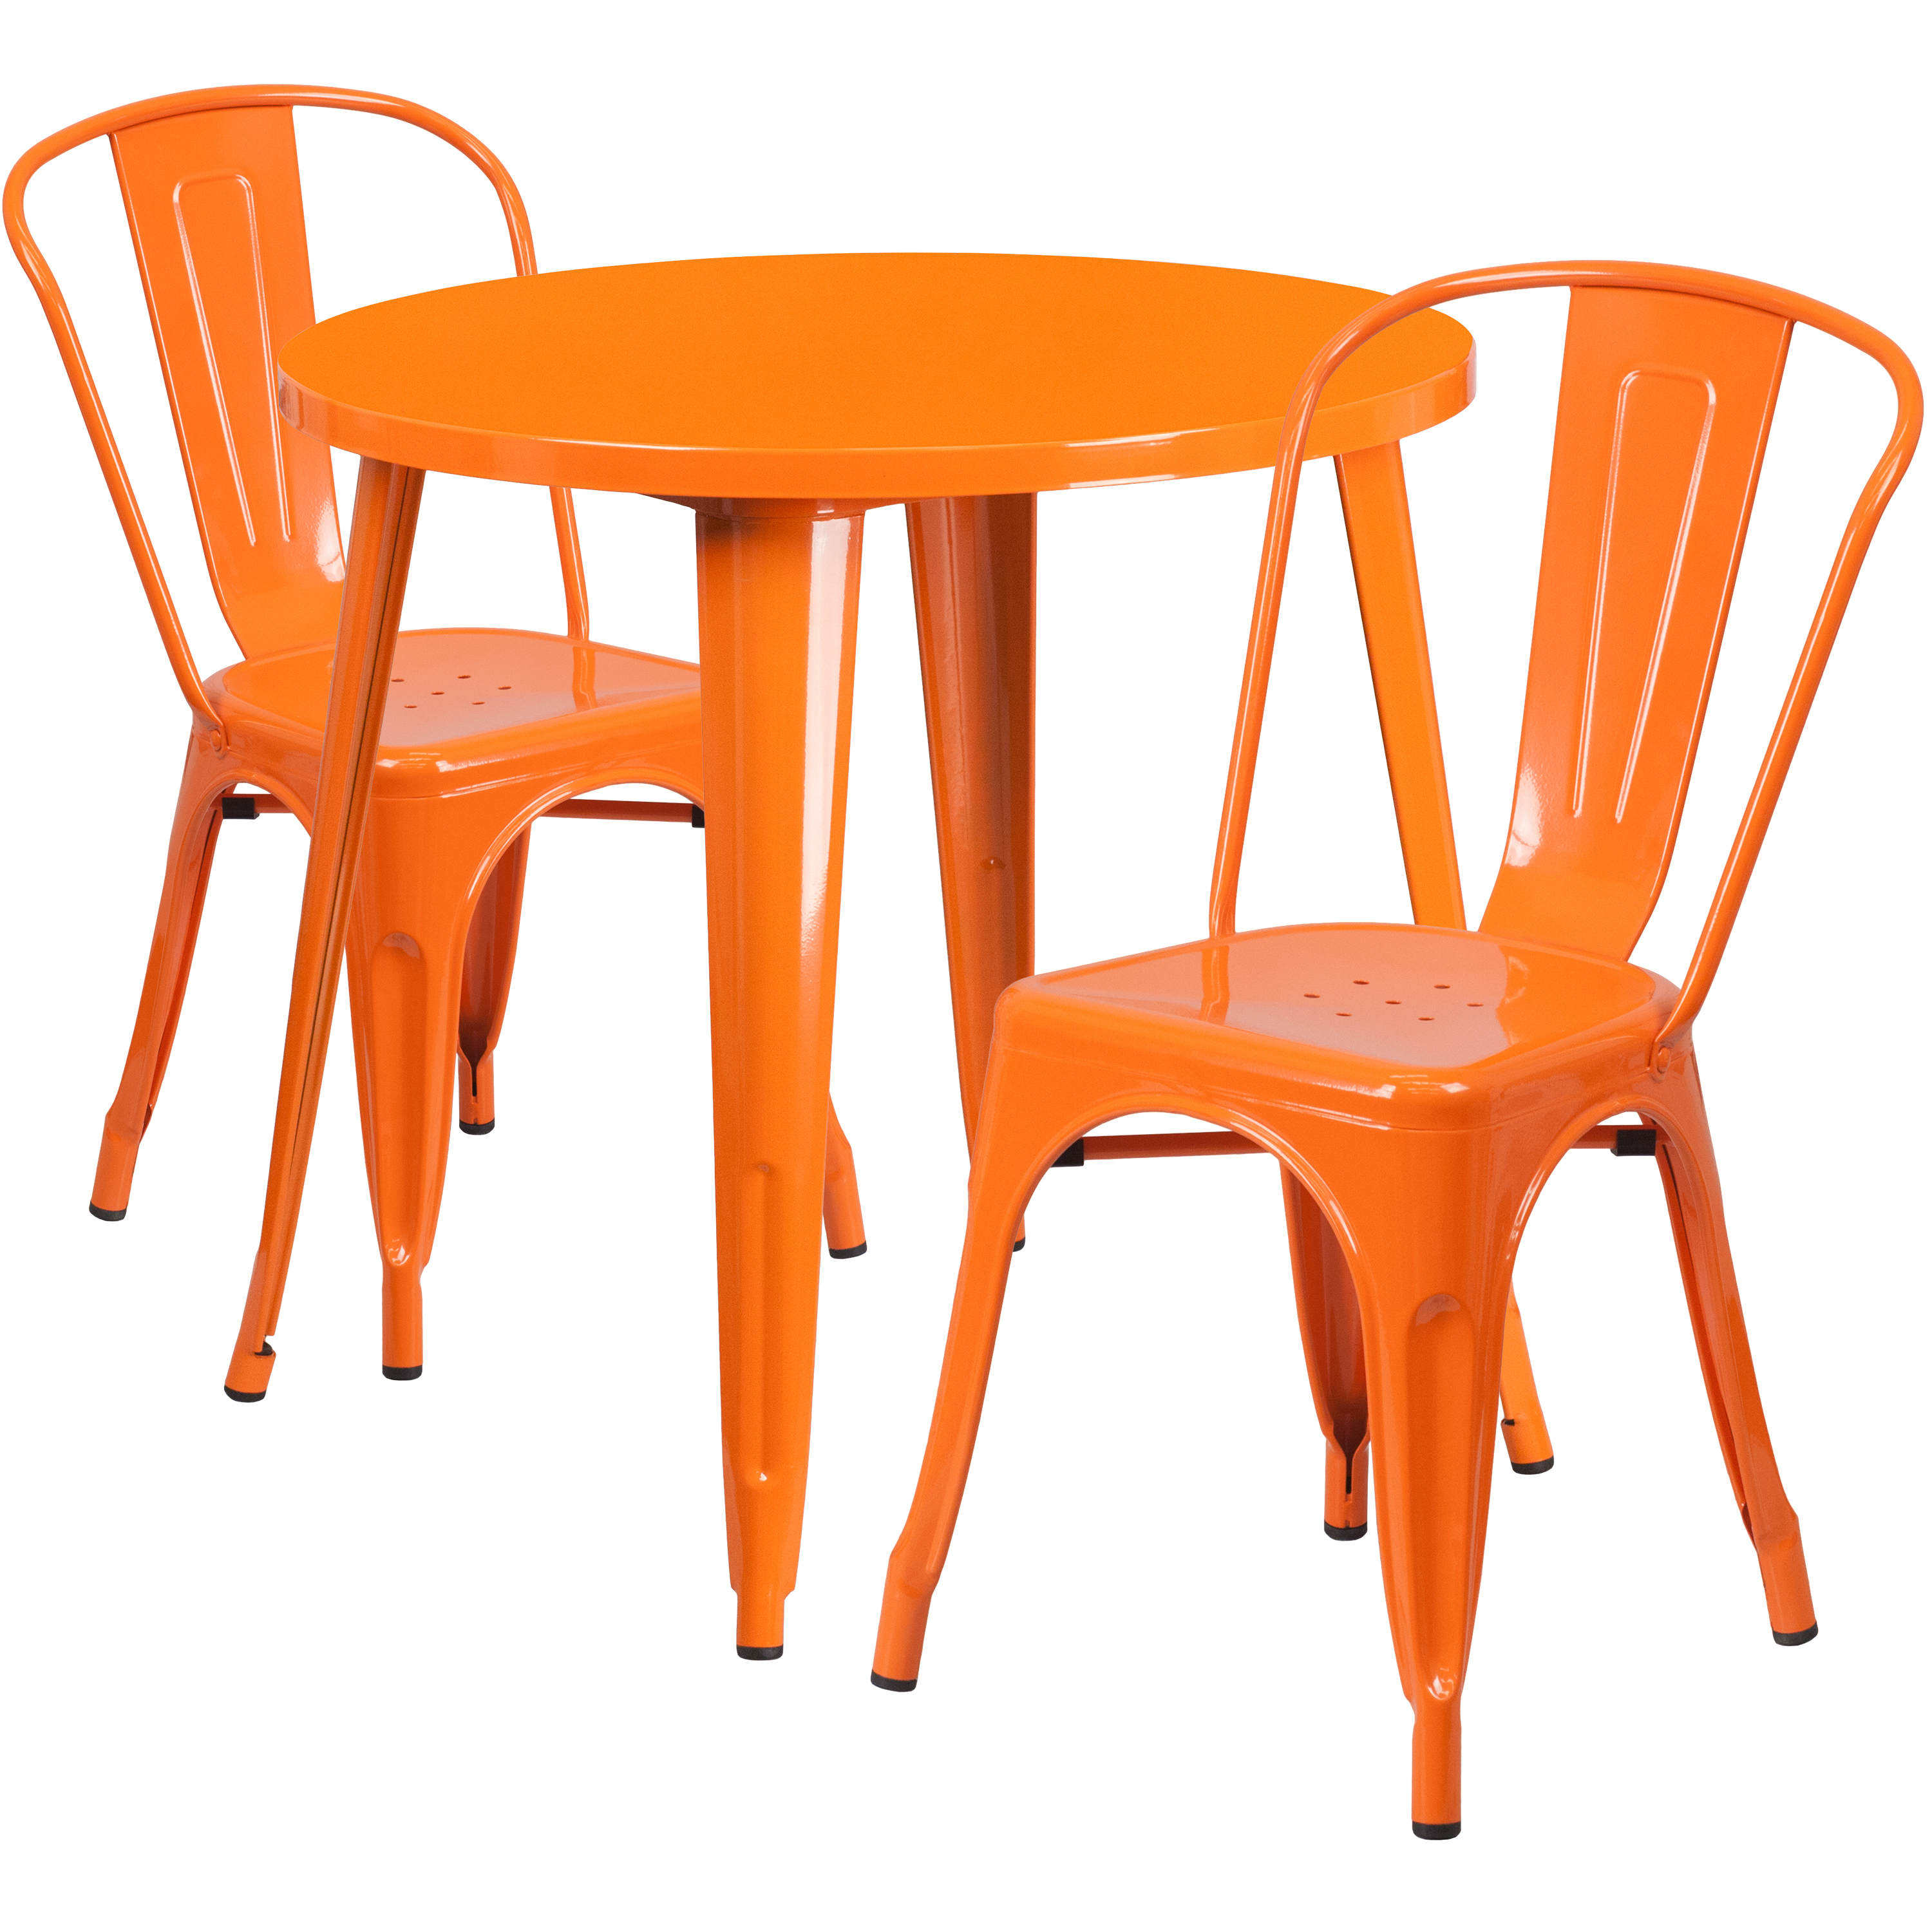 Flash Furniture CH-51090TH-2-18CAFE-OR-GG 30" Round Orange Metal Indoor/Outdoor Table Set with 2 Cafe Chairs